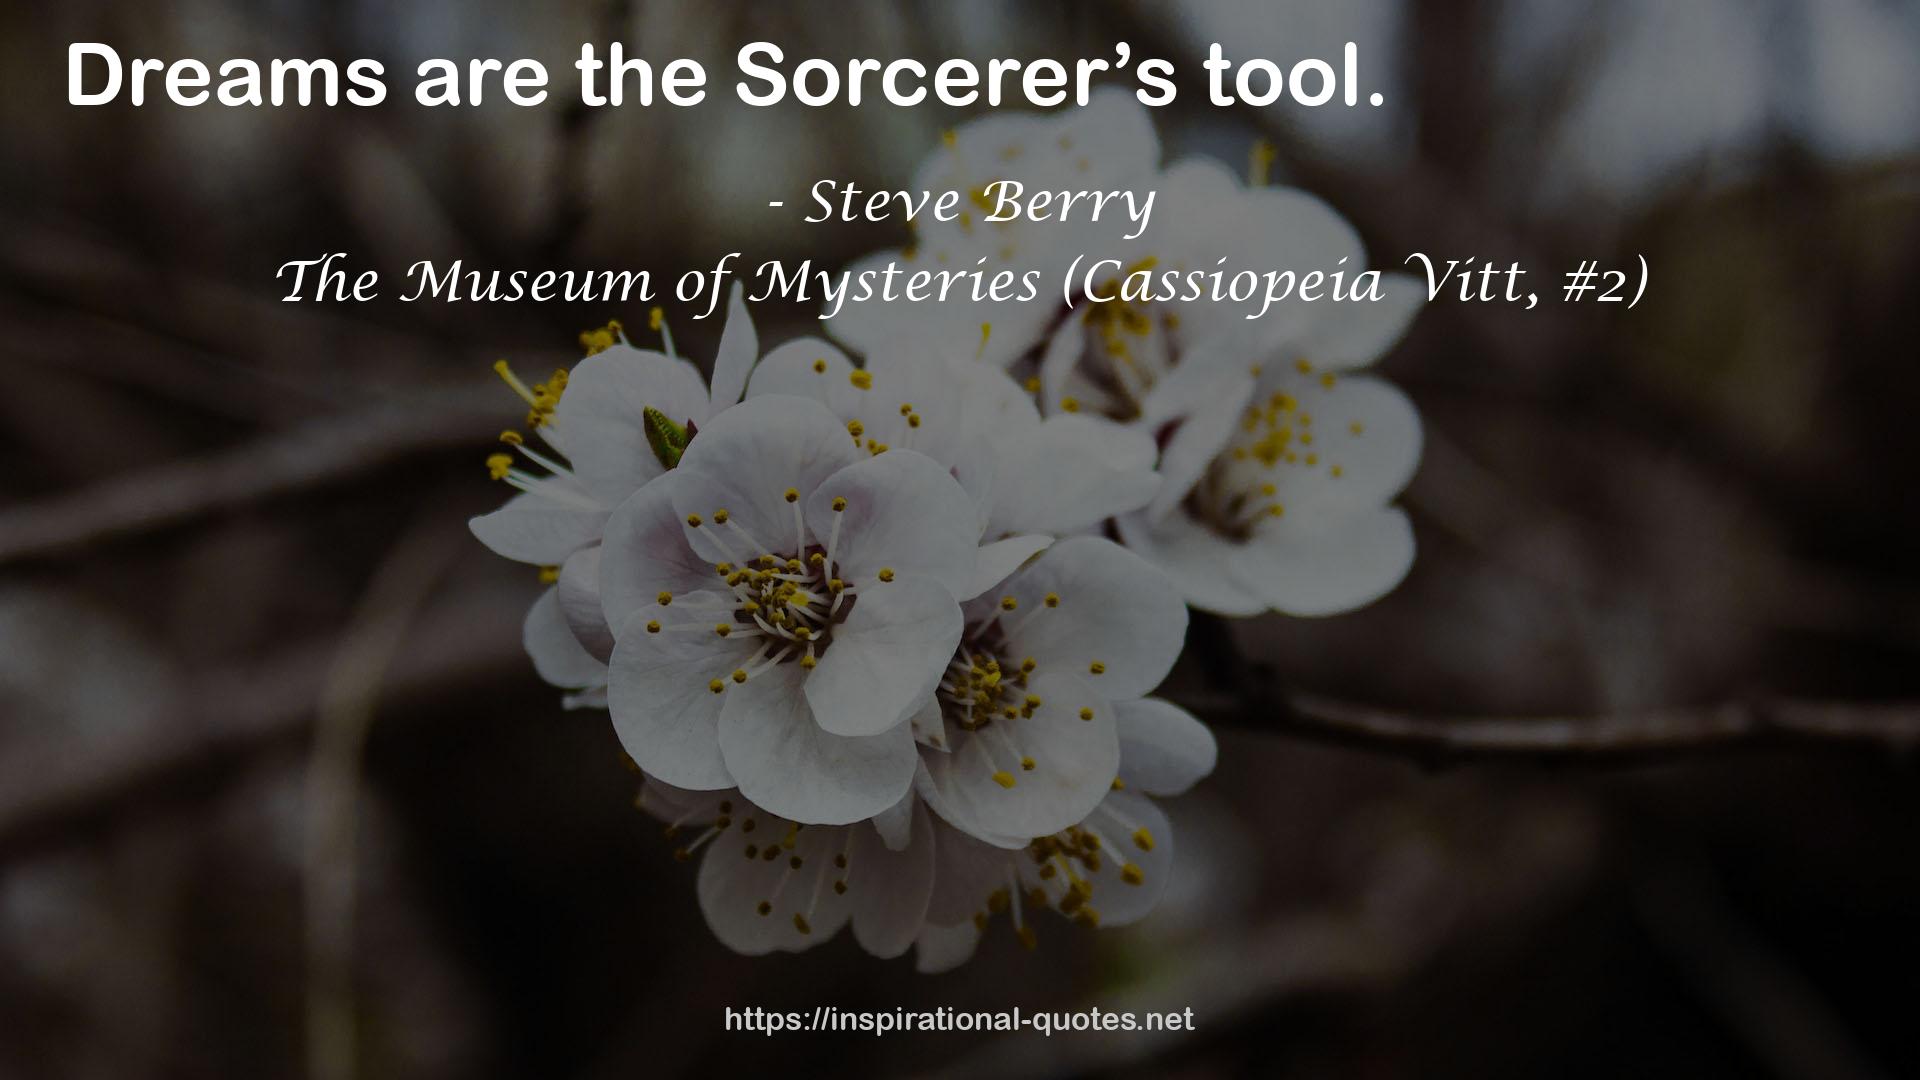 Steve Berry QUOTES